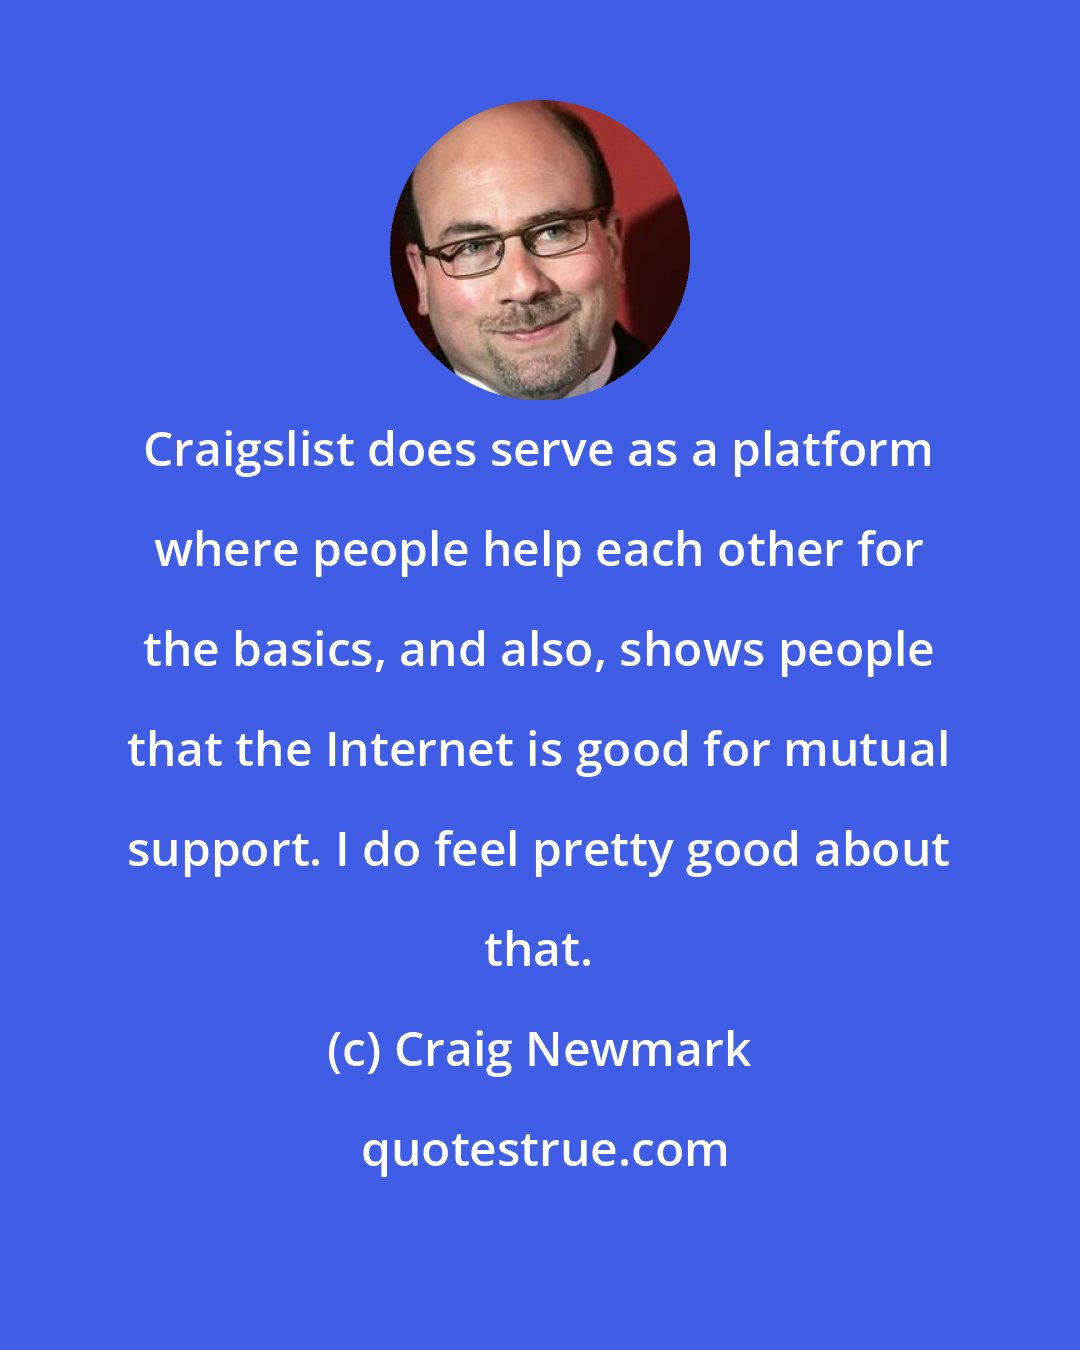 Craig Newmark: Craigslist does serve as a platform where people help each other for the basics, and also, shows people that the Internet is good for mutual support. I do feel pretty good about that.